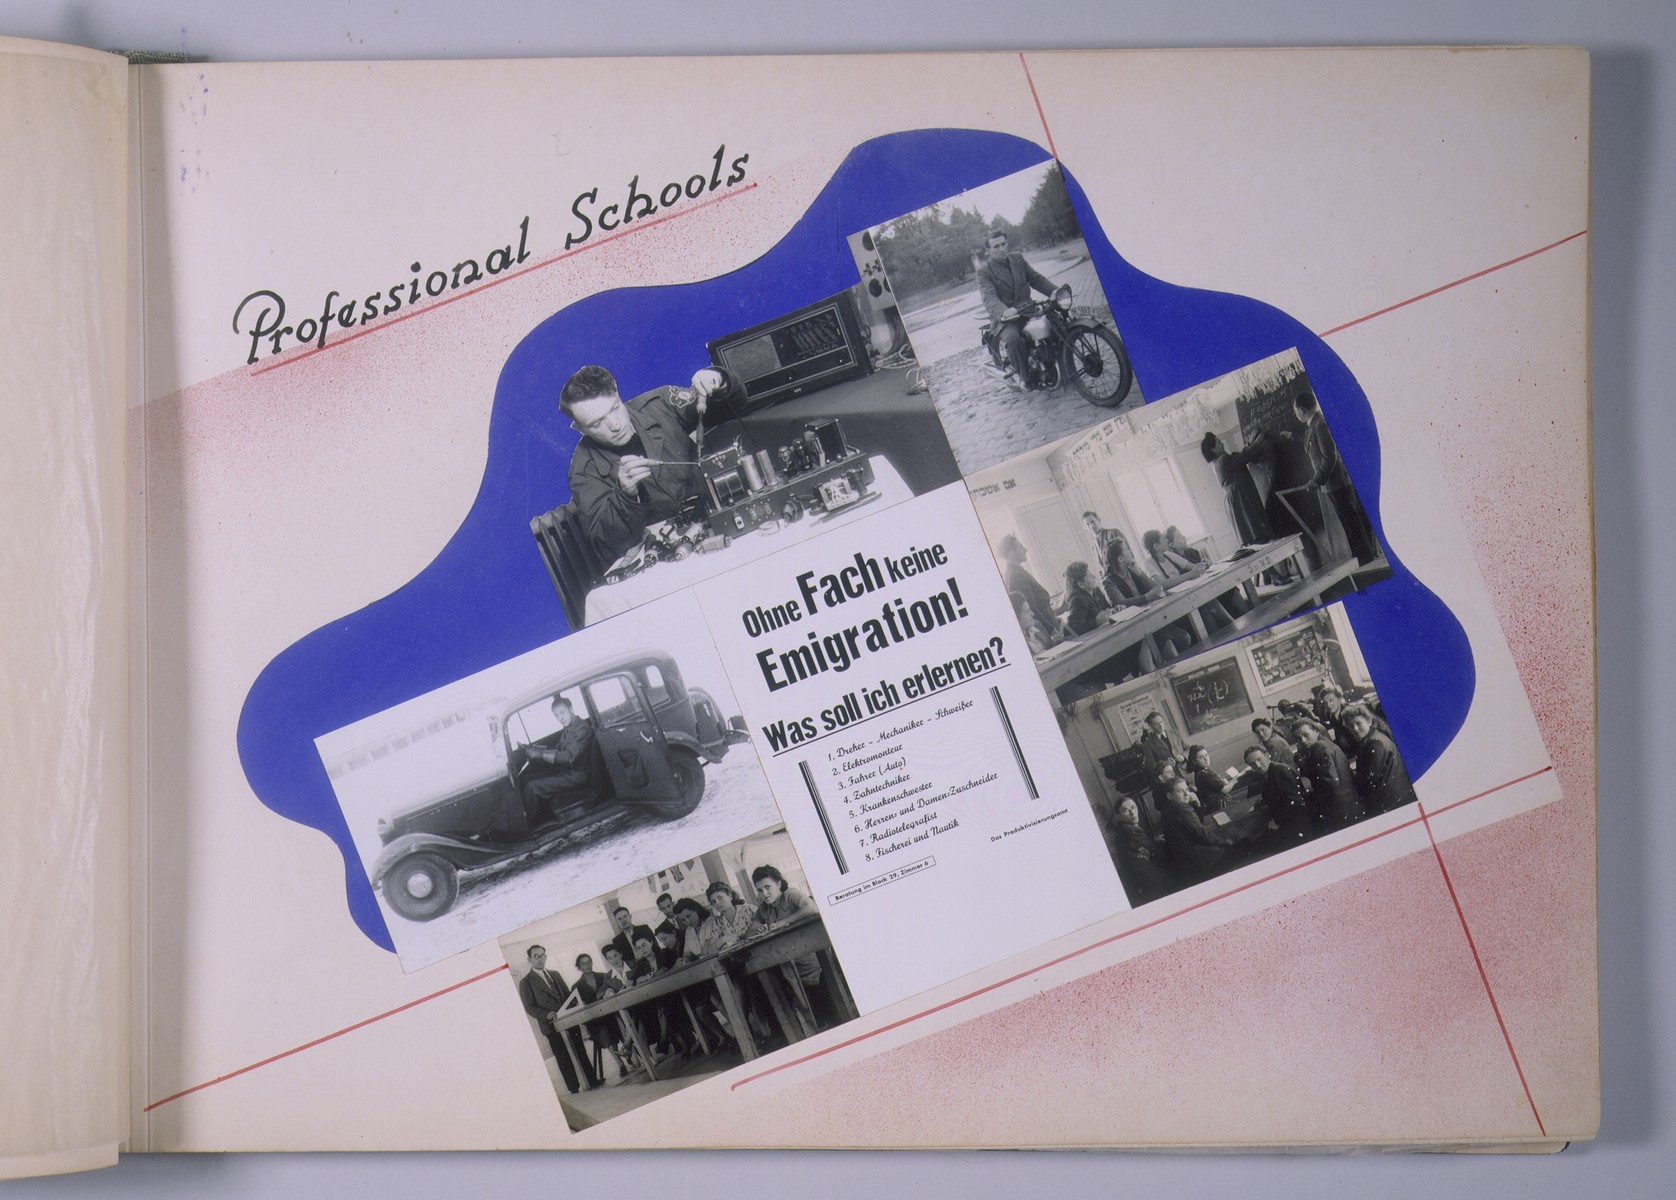 One page of a scrapbook/photo album that includes photographs of vocational training activities [probably at the Schlachtensee displaced persons camp].  The page bears the heading, "Professional Schools." 

The album was assembled by Pinkus Proszowski, a graphic designer originally from Lodz, who served as director of the children's home in the Schlachtensee displaced persons camp.